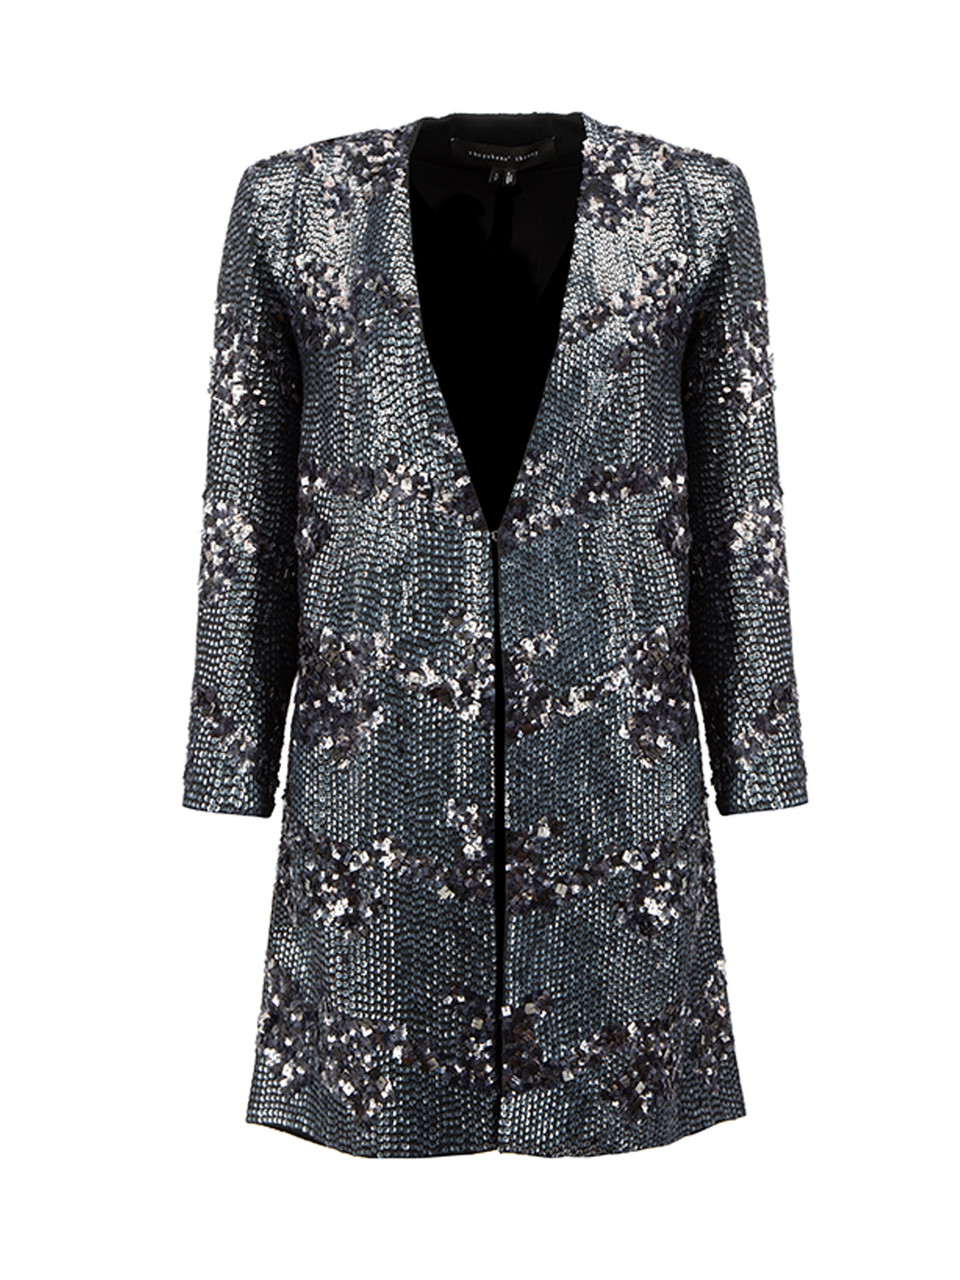 Theyskens' Theory Anthracite Sequinned Evening Coat